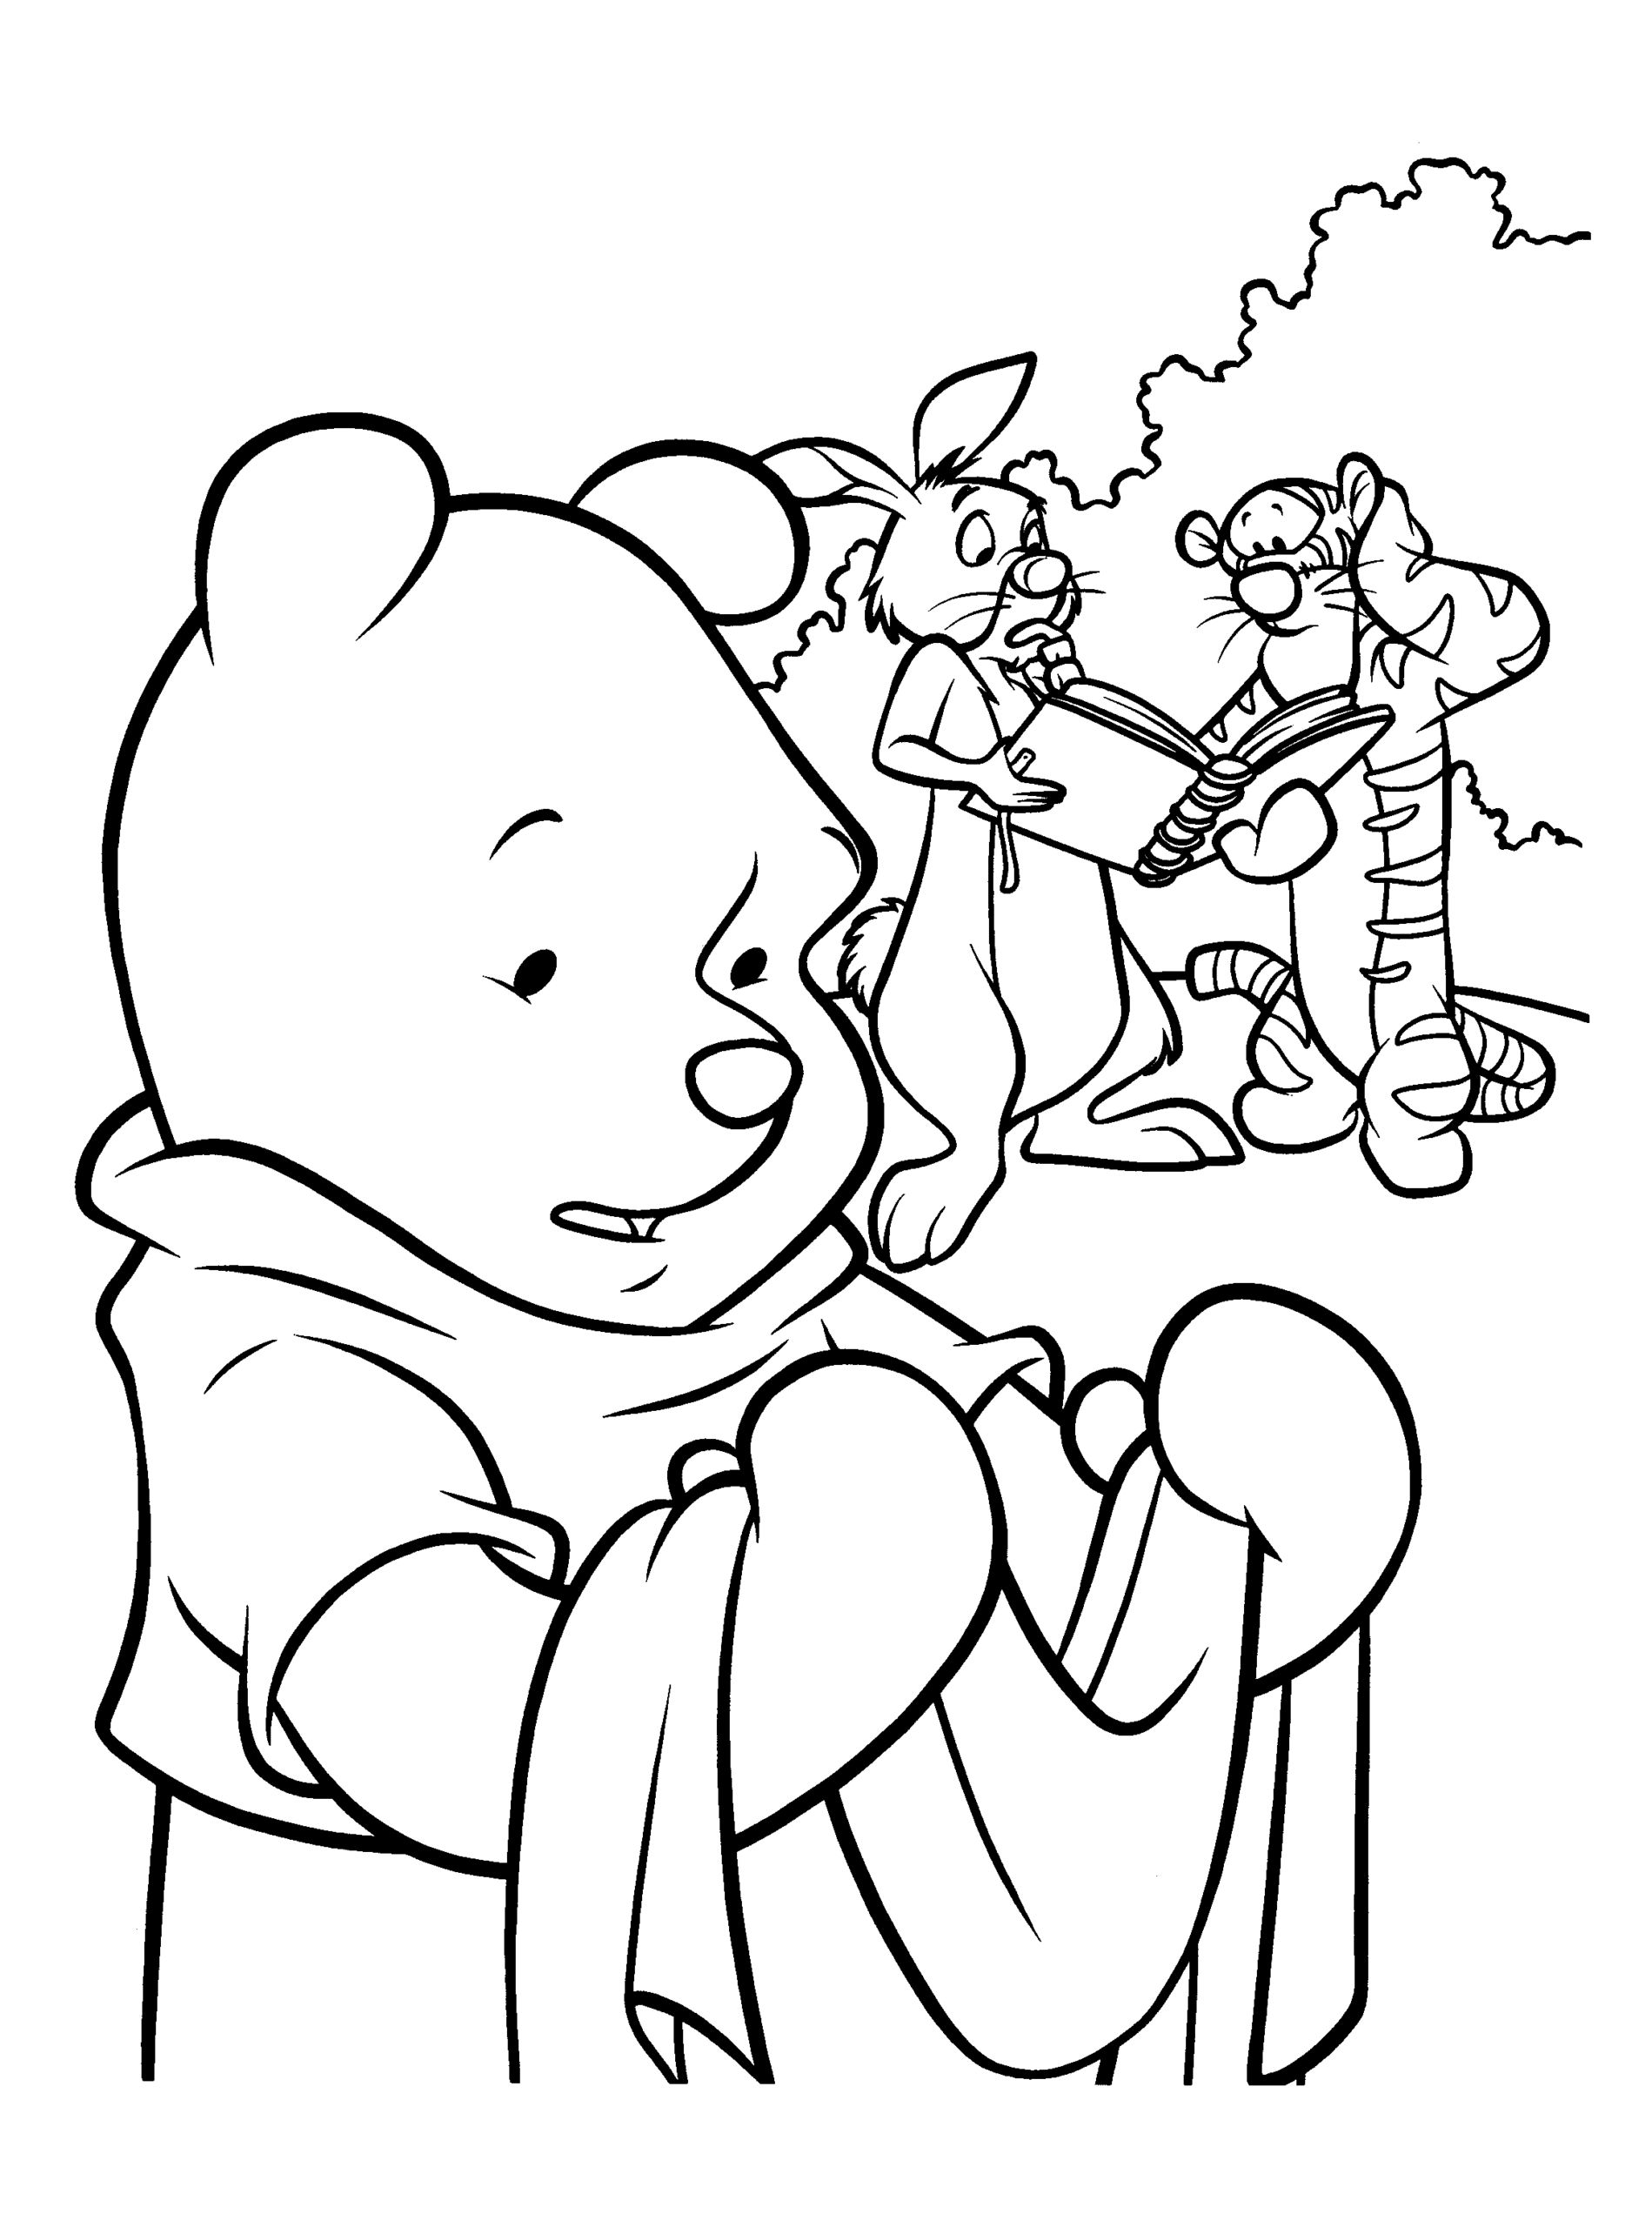 Winnie the Pooh Coloring Pages Cartoons winnie the pooh 19 Printable 2020 7114 Coloring4free